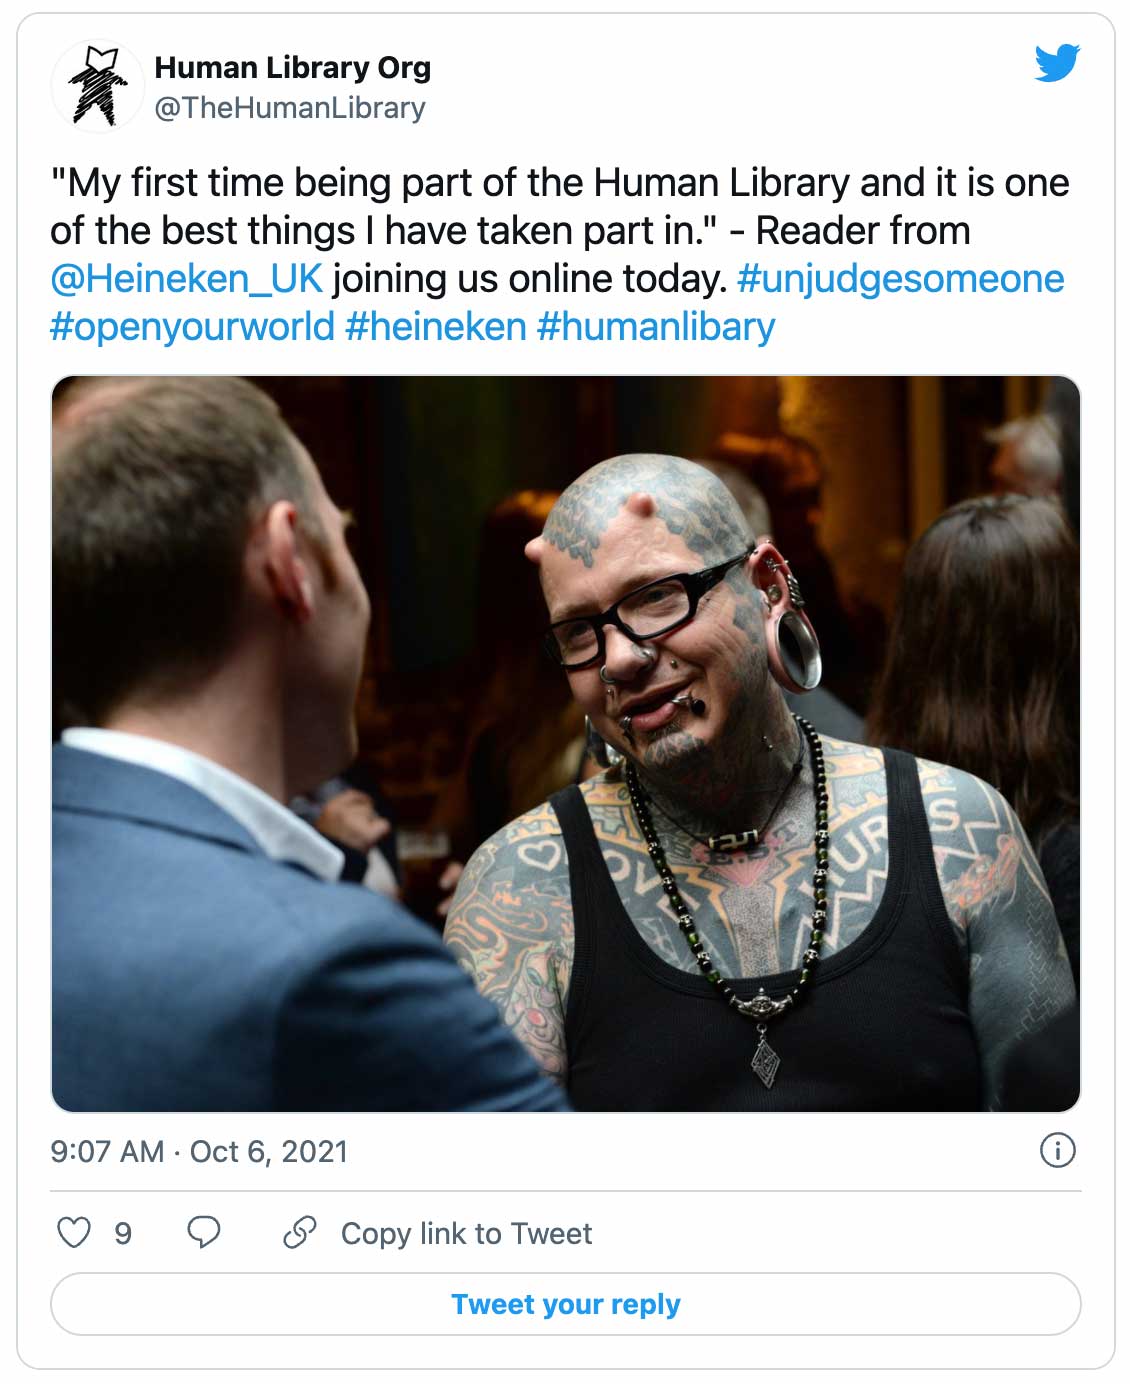 @TheHumanLibrary: "My first time being part of the Human Library and it is one of the best things I have taken part in." - Reader from  @Heineken_UK  joining us online today. #unjudgesomeone #openyourworld #heineken #humanlibary